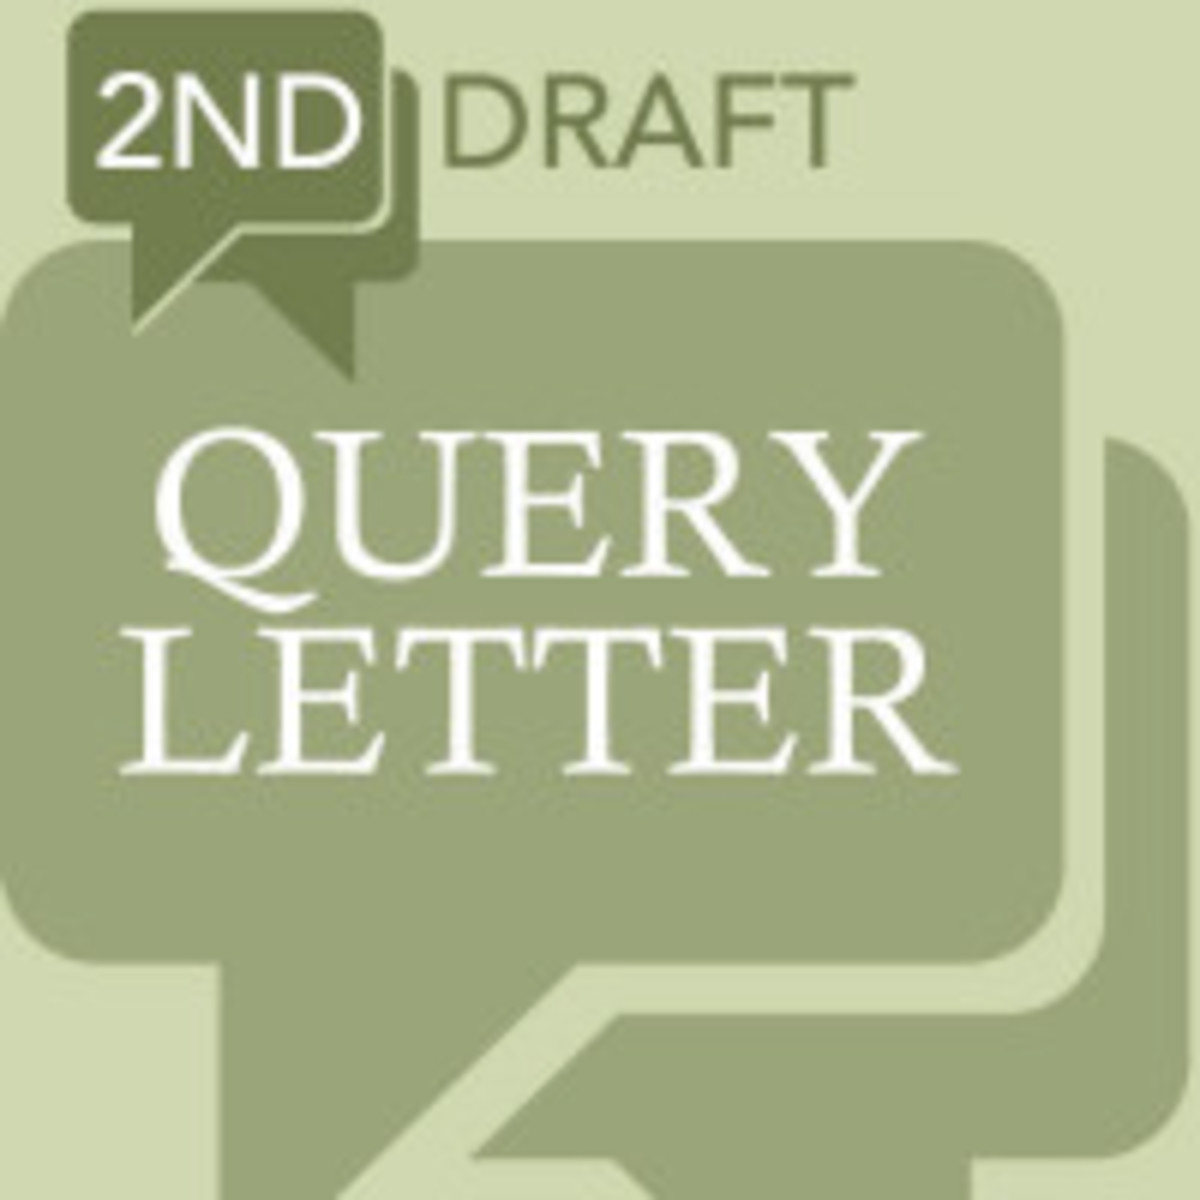 Are you done writing and revising your manuscript or nonfiction book proposal? Then you’re ready to write a query letter. In order to ensure you make the best impression on literary agents and acquisitions editors, we recommend getting a 2nd Draft Query Letter Critique.